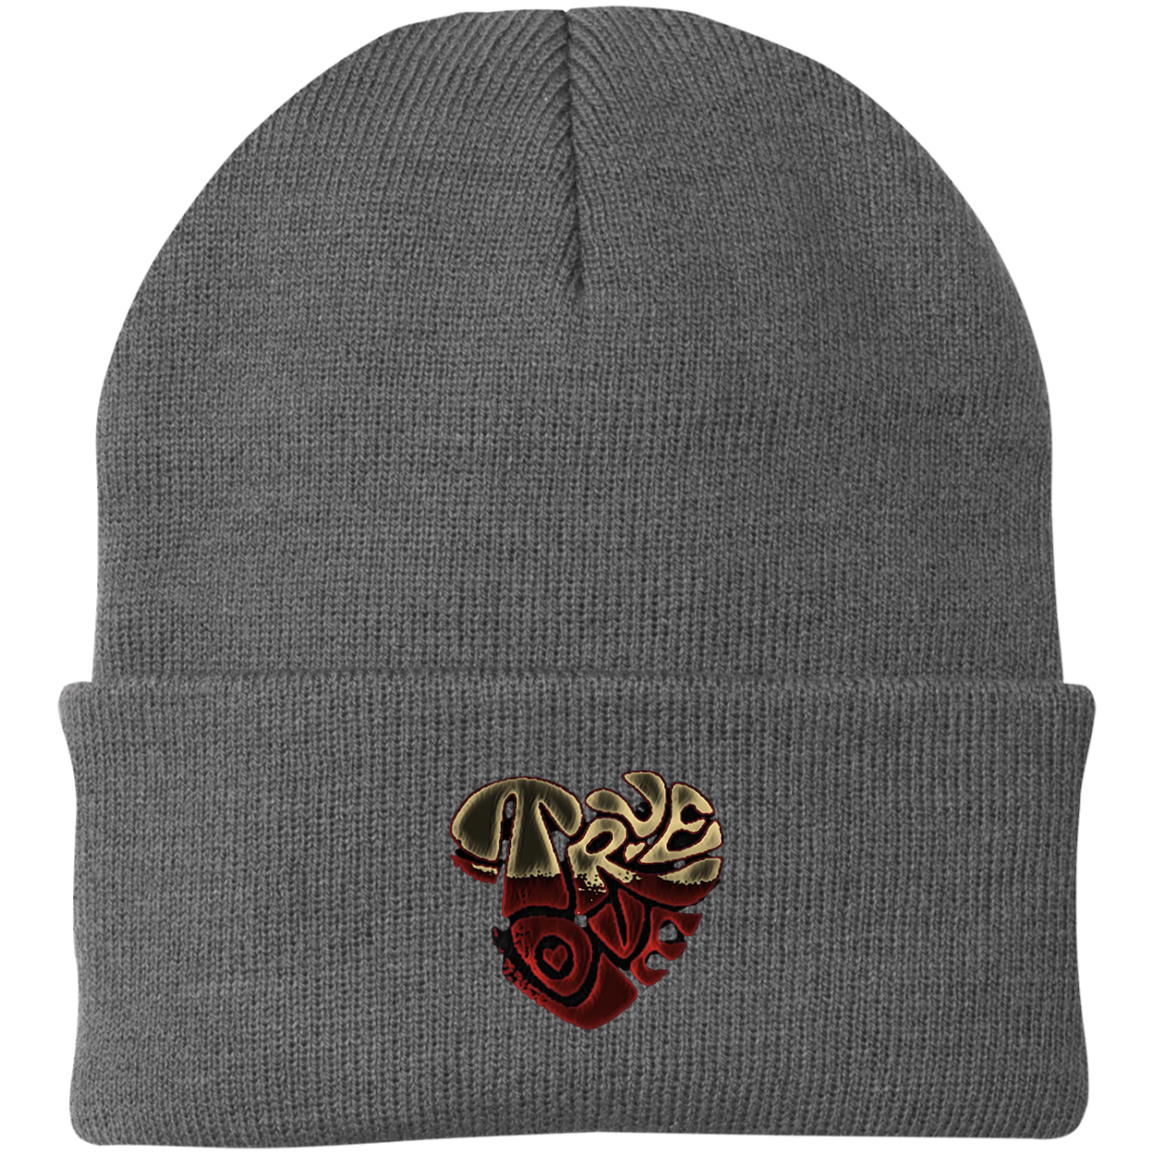 True Love dirty logo by Wisam Embroidered Knit Cap - Swag Spot Clothing Co